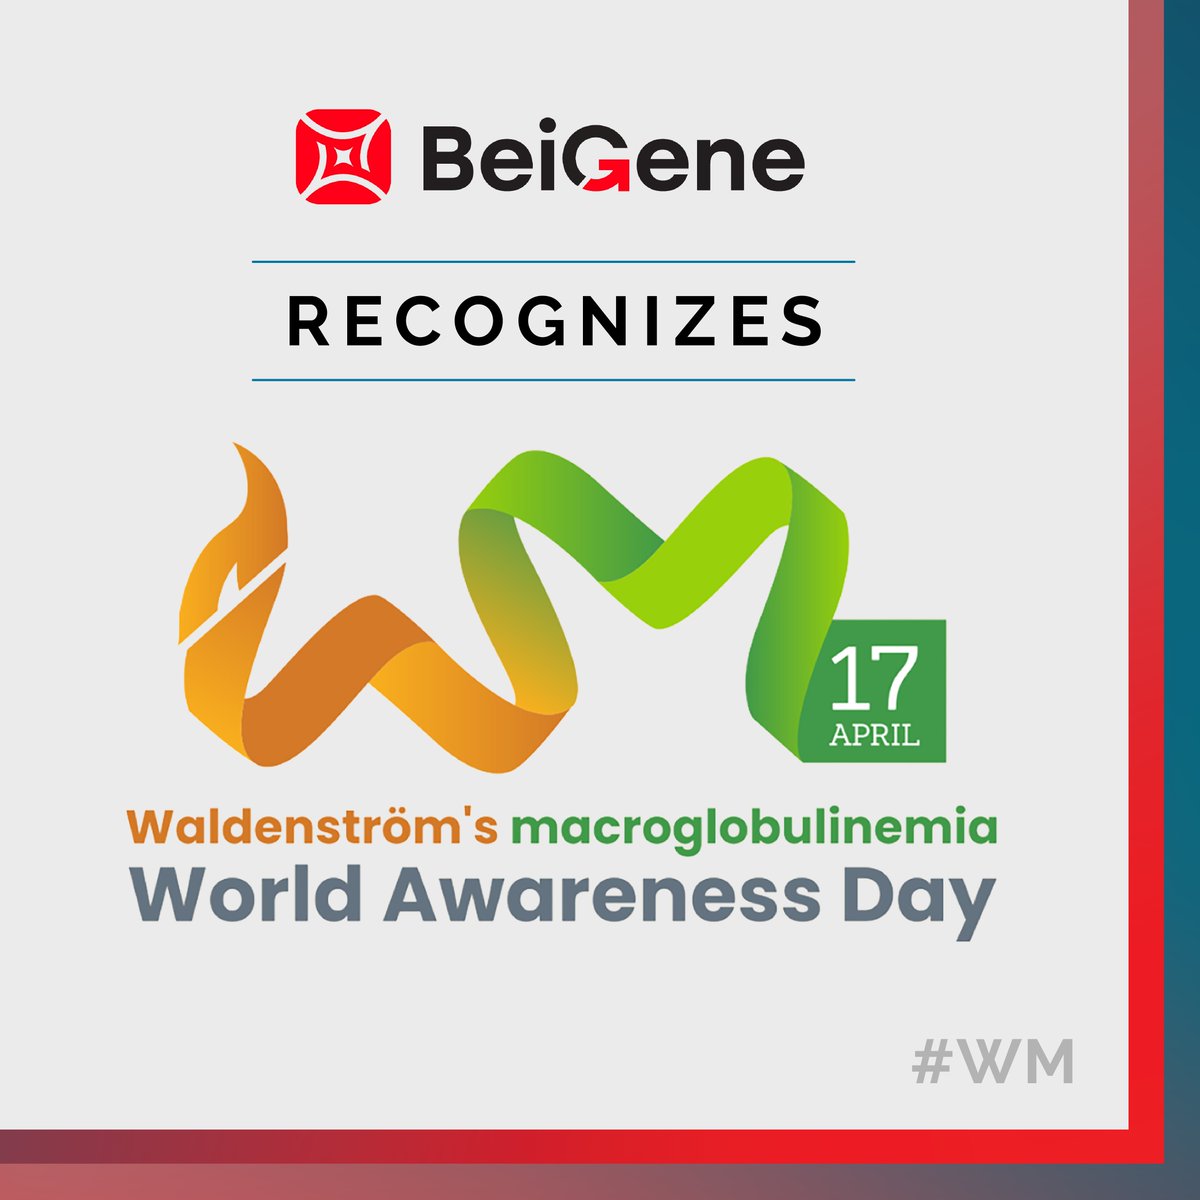 Today marks #Waldenstrom's Macroglobulinemia World Awareness Day. At BeiGene, we’re committed to supporting patients battling #BloodCancers, including #WM through innovative treatments and shining a spotlight on #WMWorldAwarenessDay to spread knowledge and encourage support.